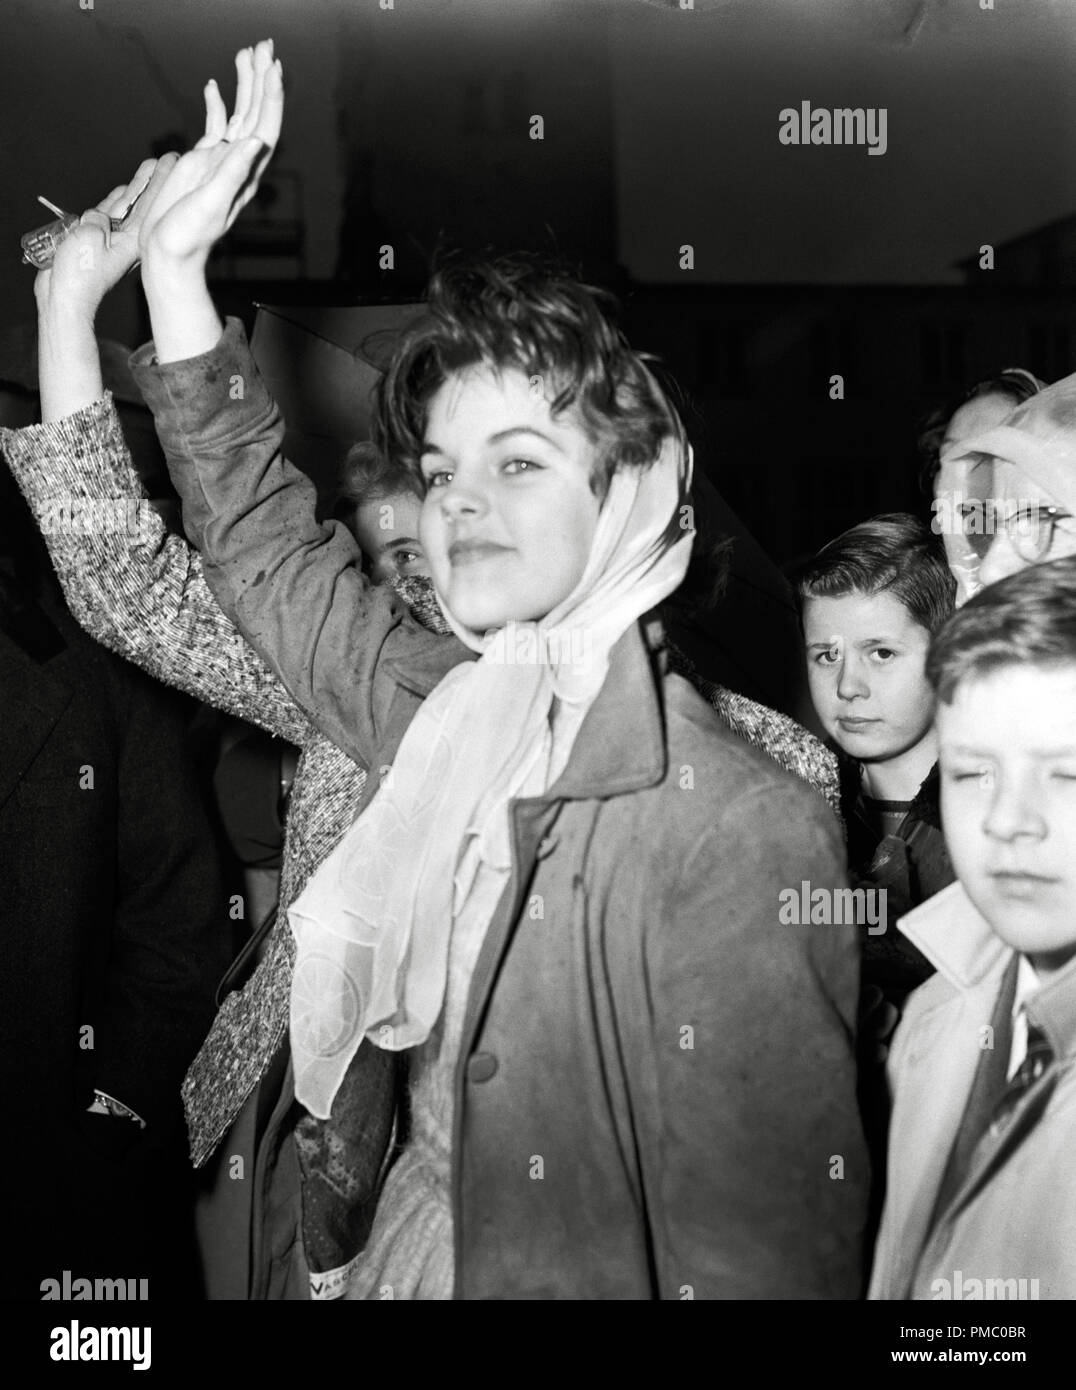 Priscilla Beaulieu (soon to be Presley) waves goodbye as  Elvis Presley departs from Rhein-Main air base in Germany to return to the United States after serving 18 months in the US Army, 1960  File Reference # 33480 999THA Stock Photo